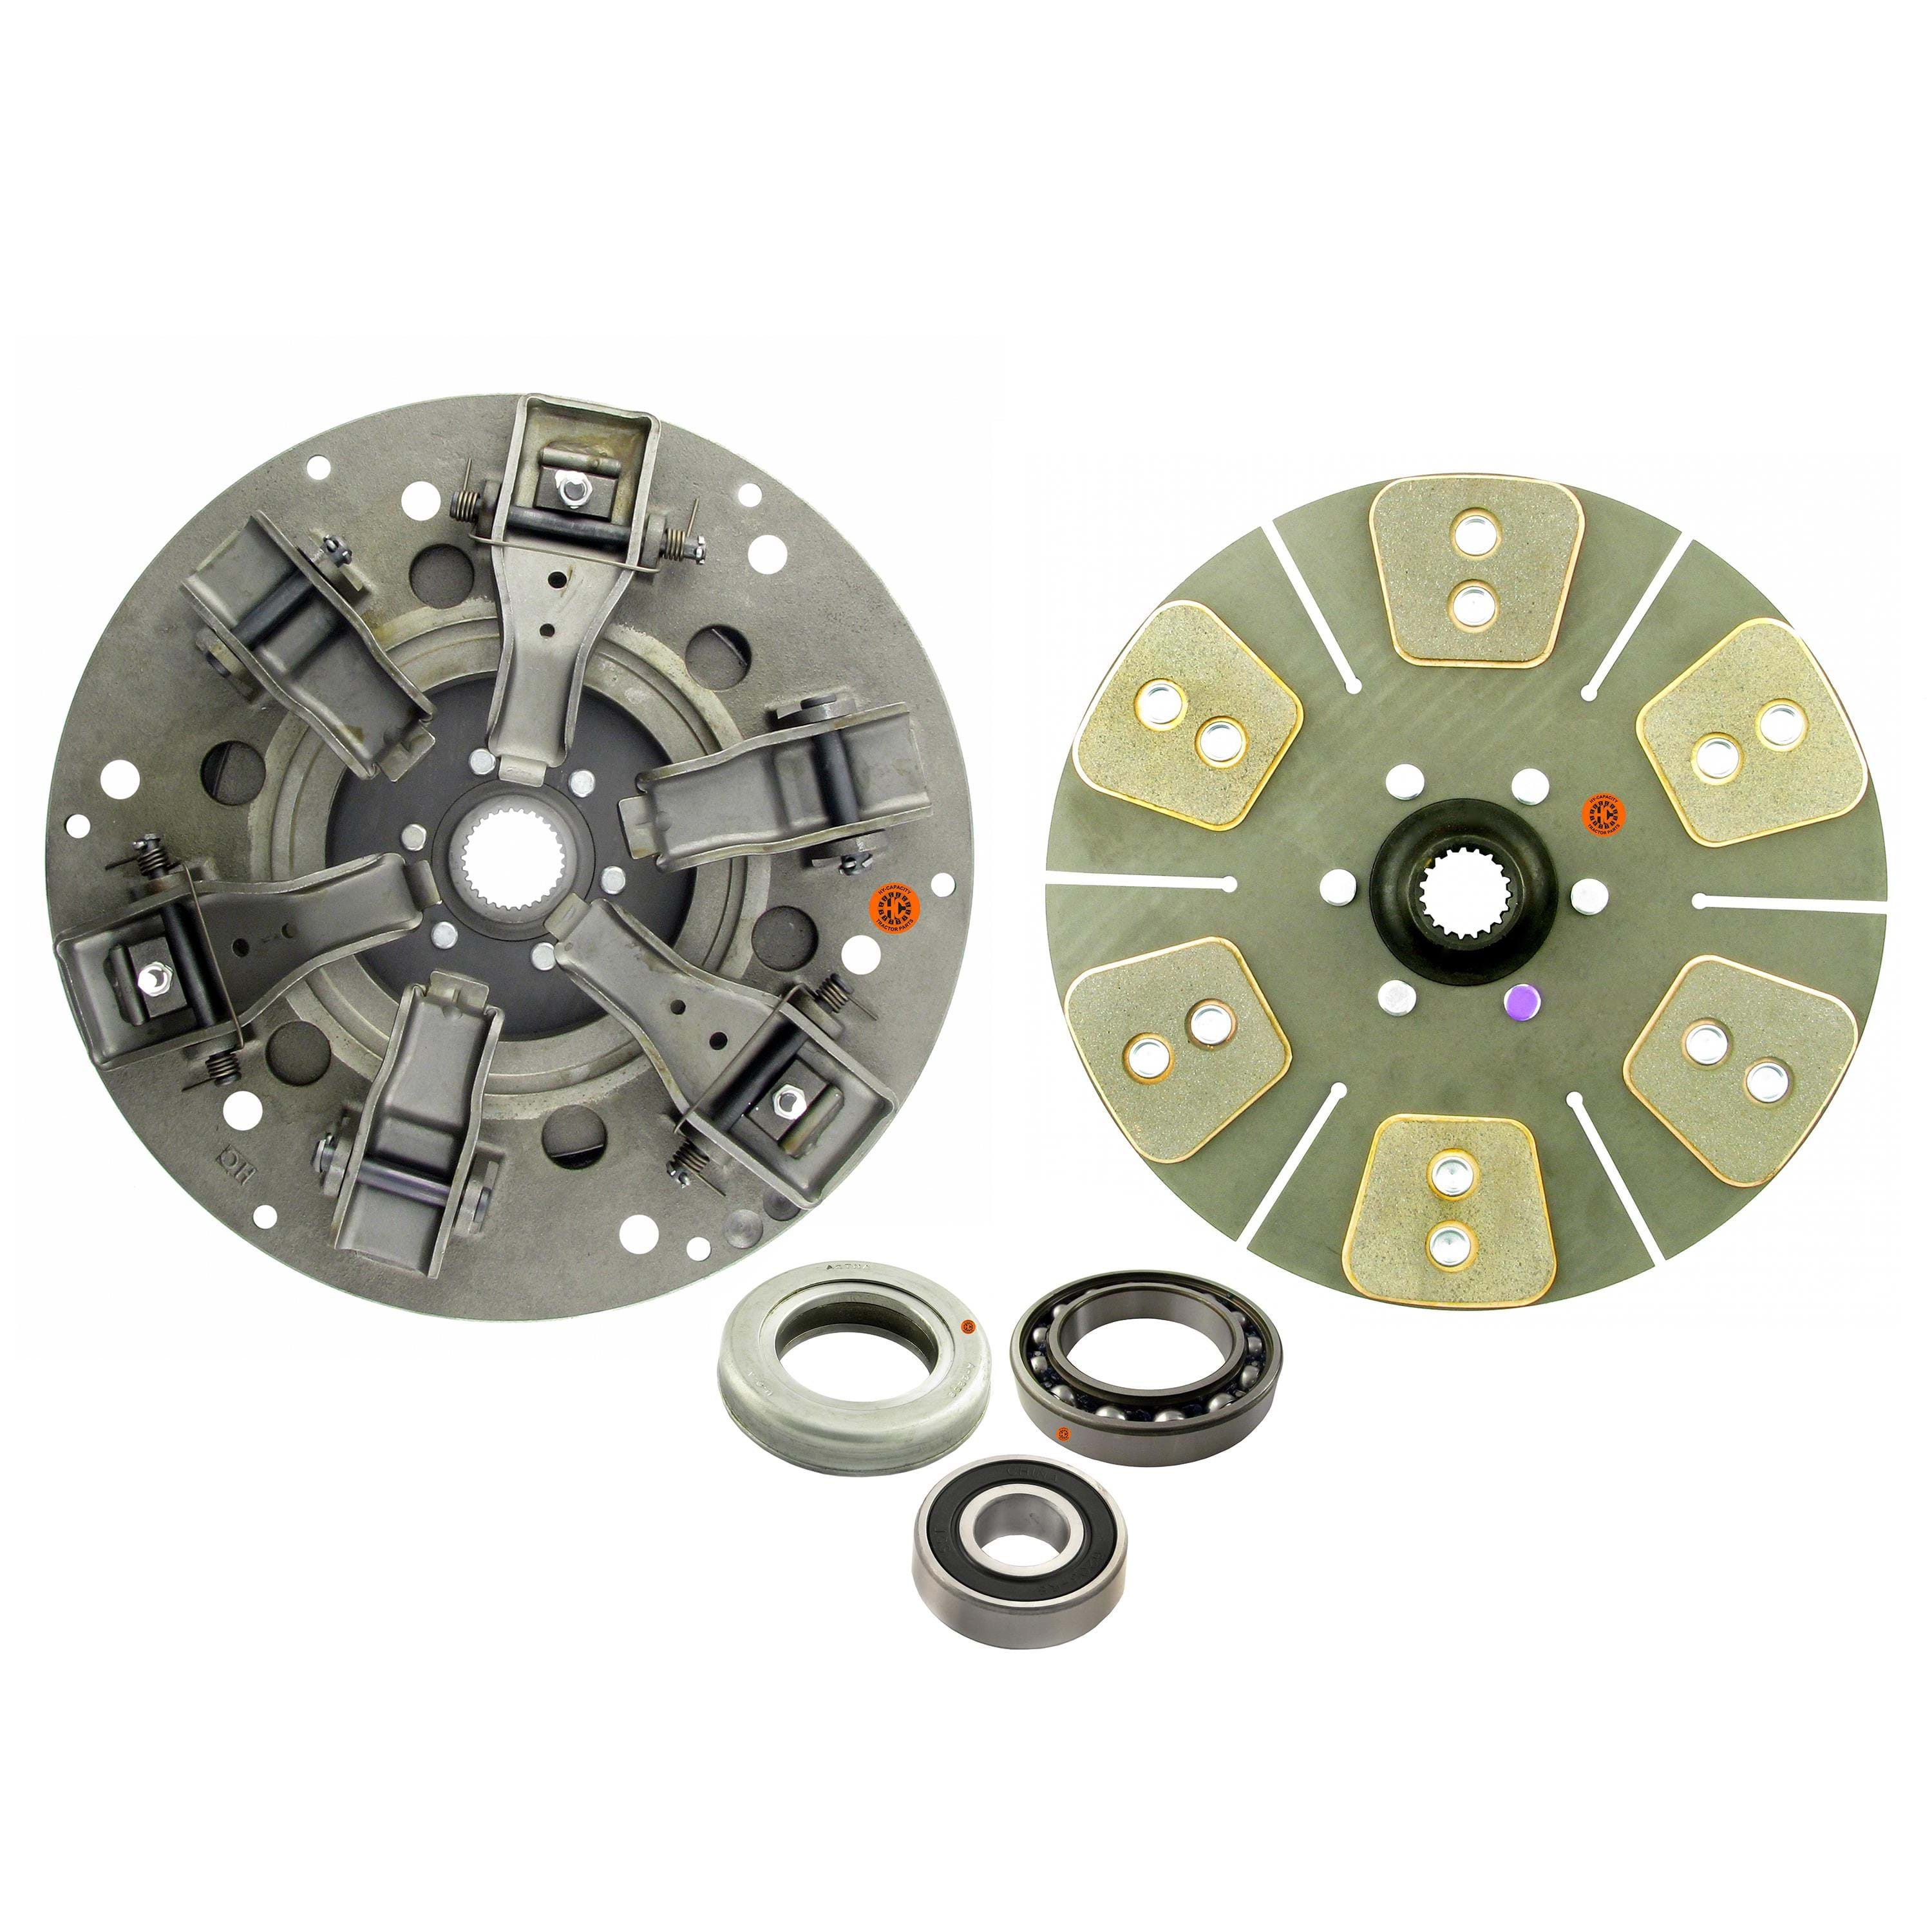 12" Dual Stage Clutch Kit, w/ 6 Large Pad Disc & Bearings - New